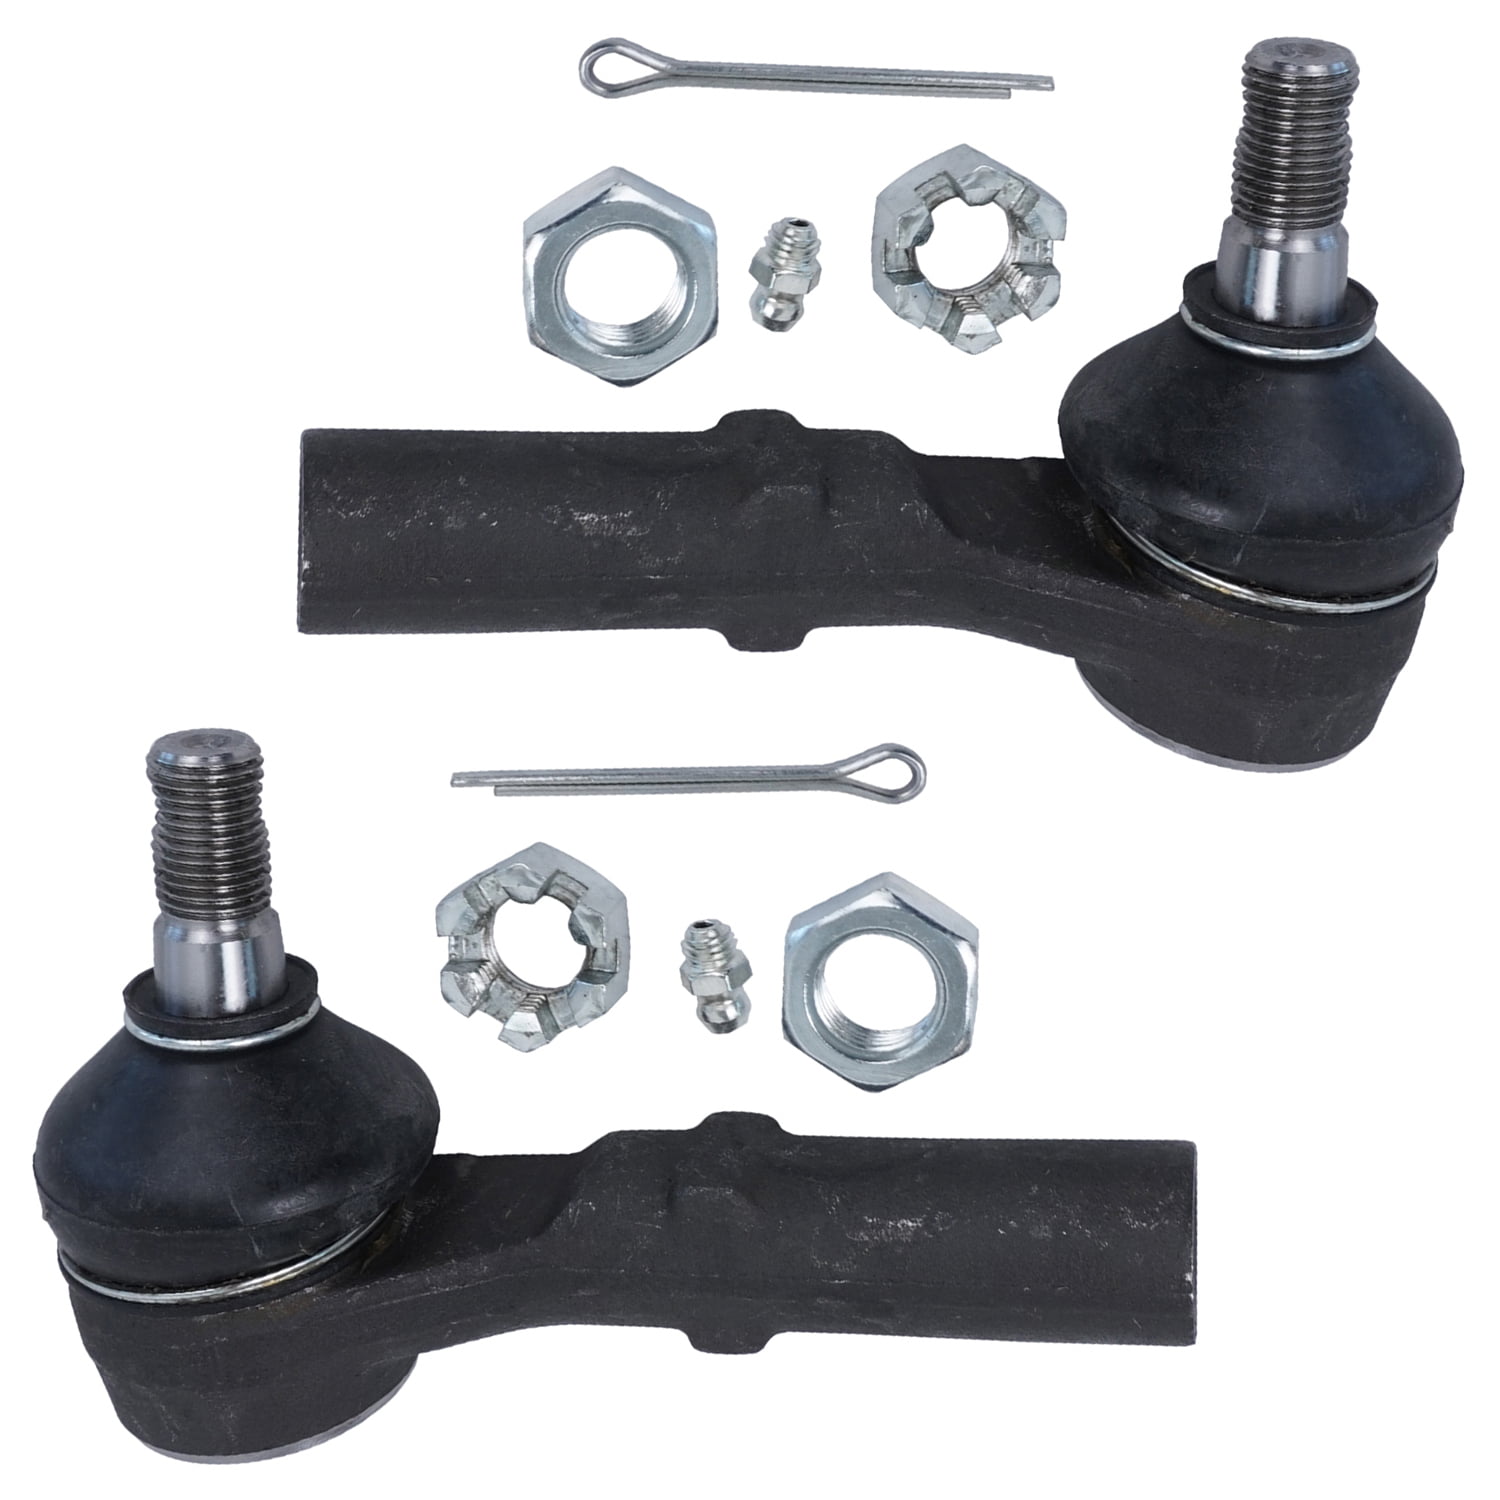 Front Outer Tie Rod Ends fits Left and Right Side 2WD Models ONLY Pair 2 1999 Dodge Durango 1997-1999 Dodge Dakota - Detroit Axle 